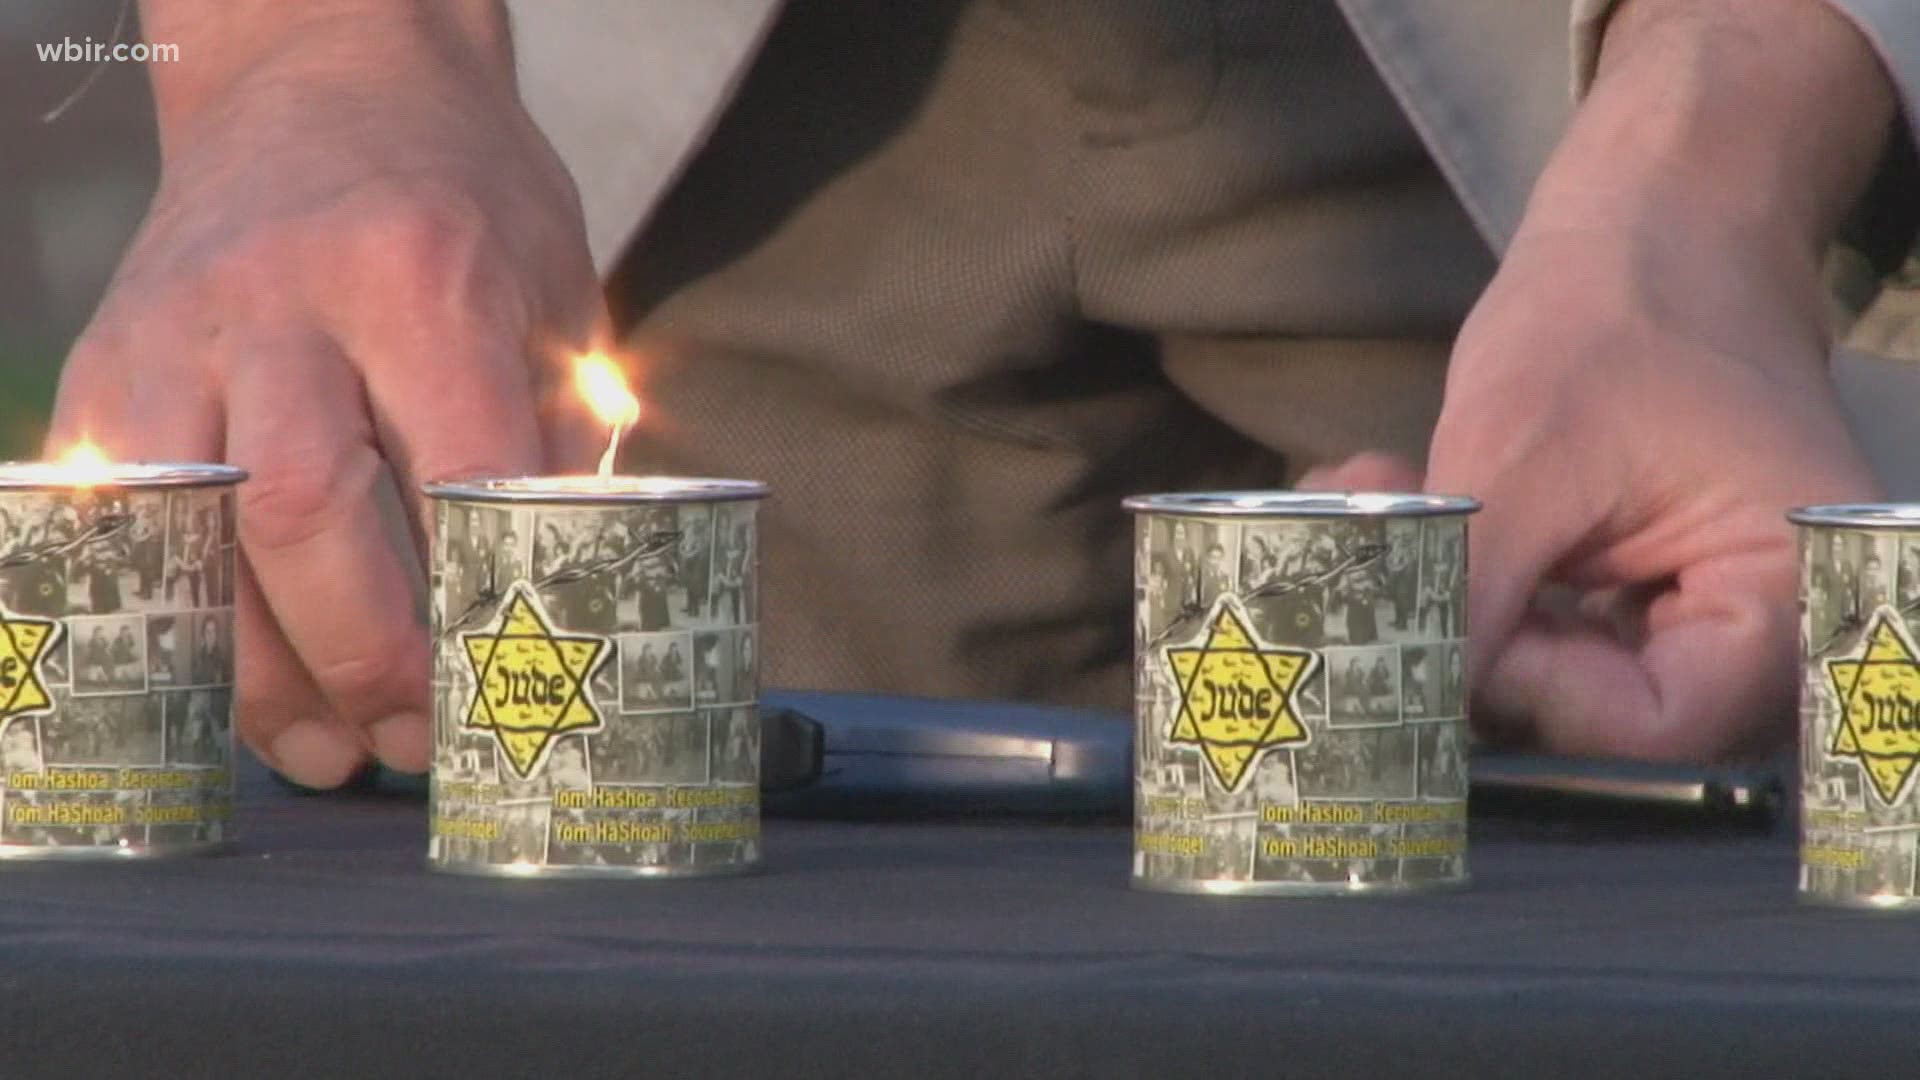 People lit yellow candles to symbolize the Star of David, to honor the six million people killed during the Holocaust.